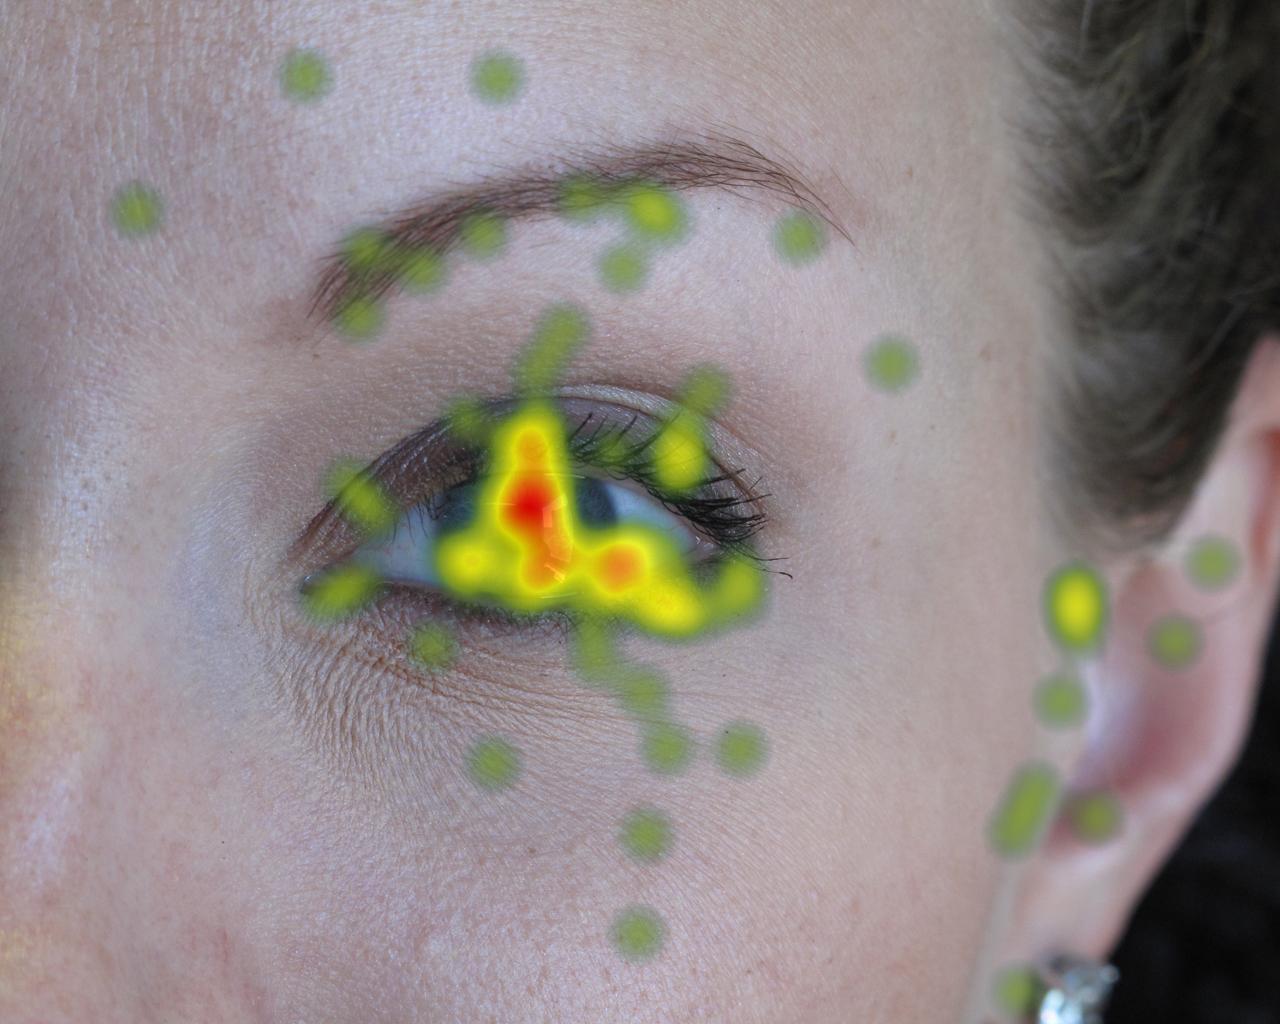 Eye tracking heatmap overlaid over a woman's face.